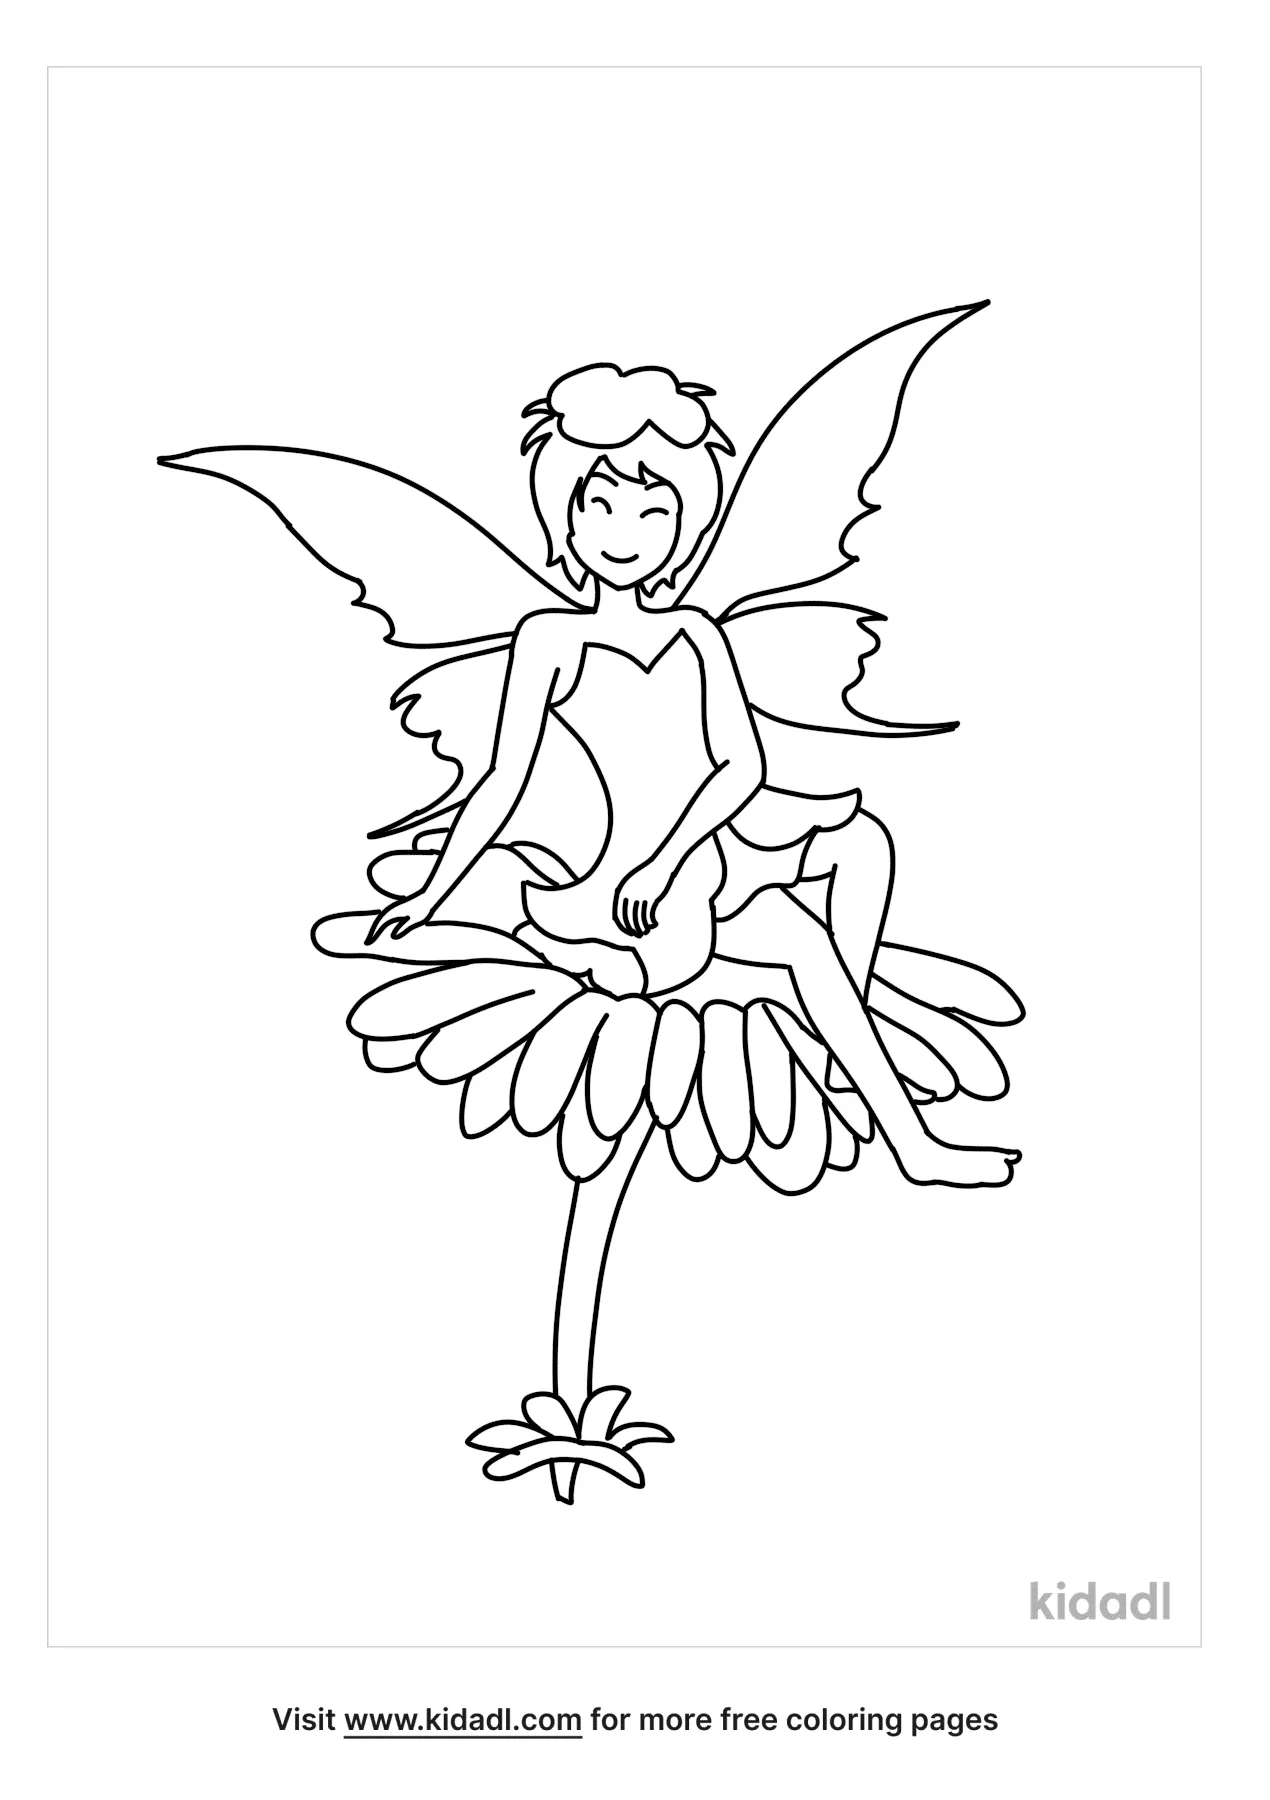 Fairy Sitting On A Flower Coloring Page